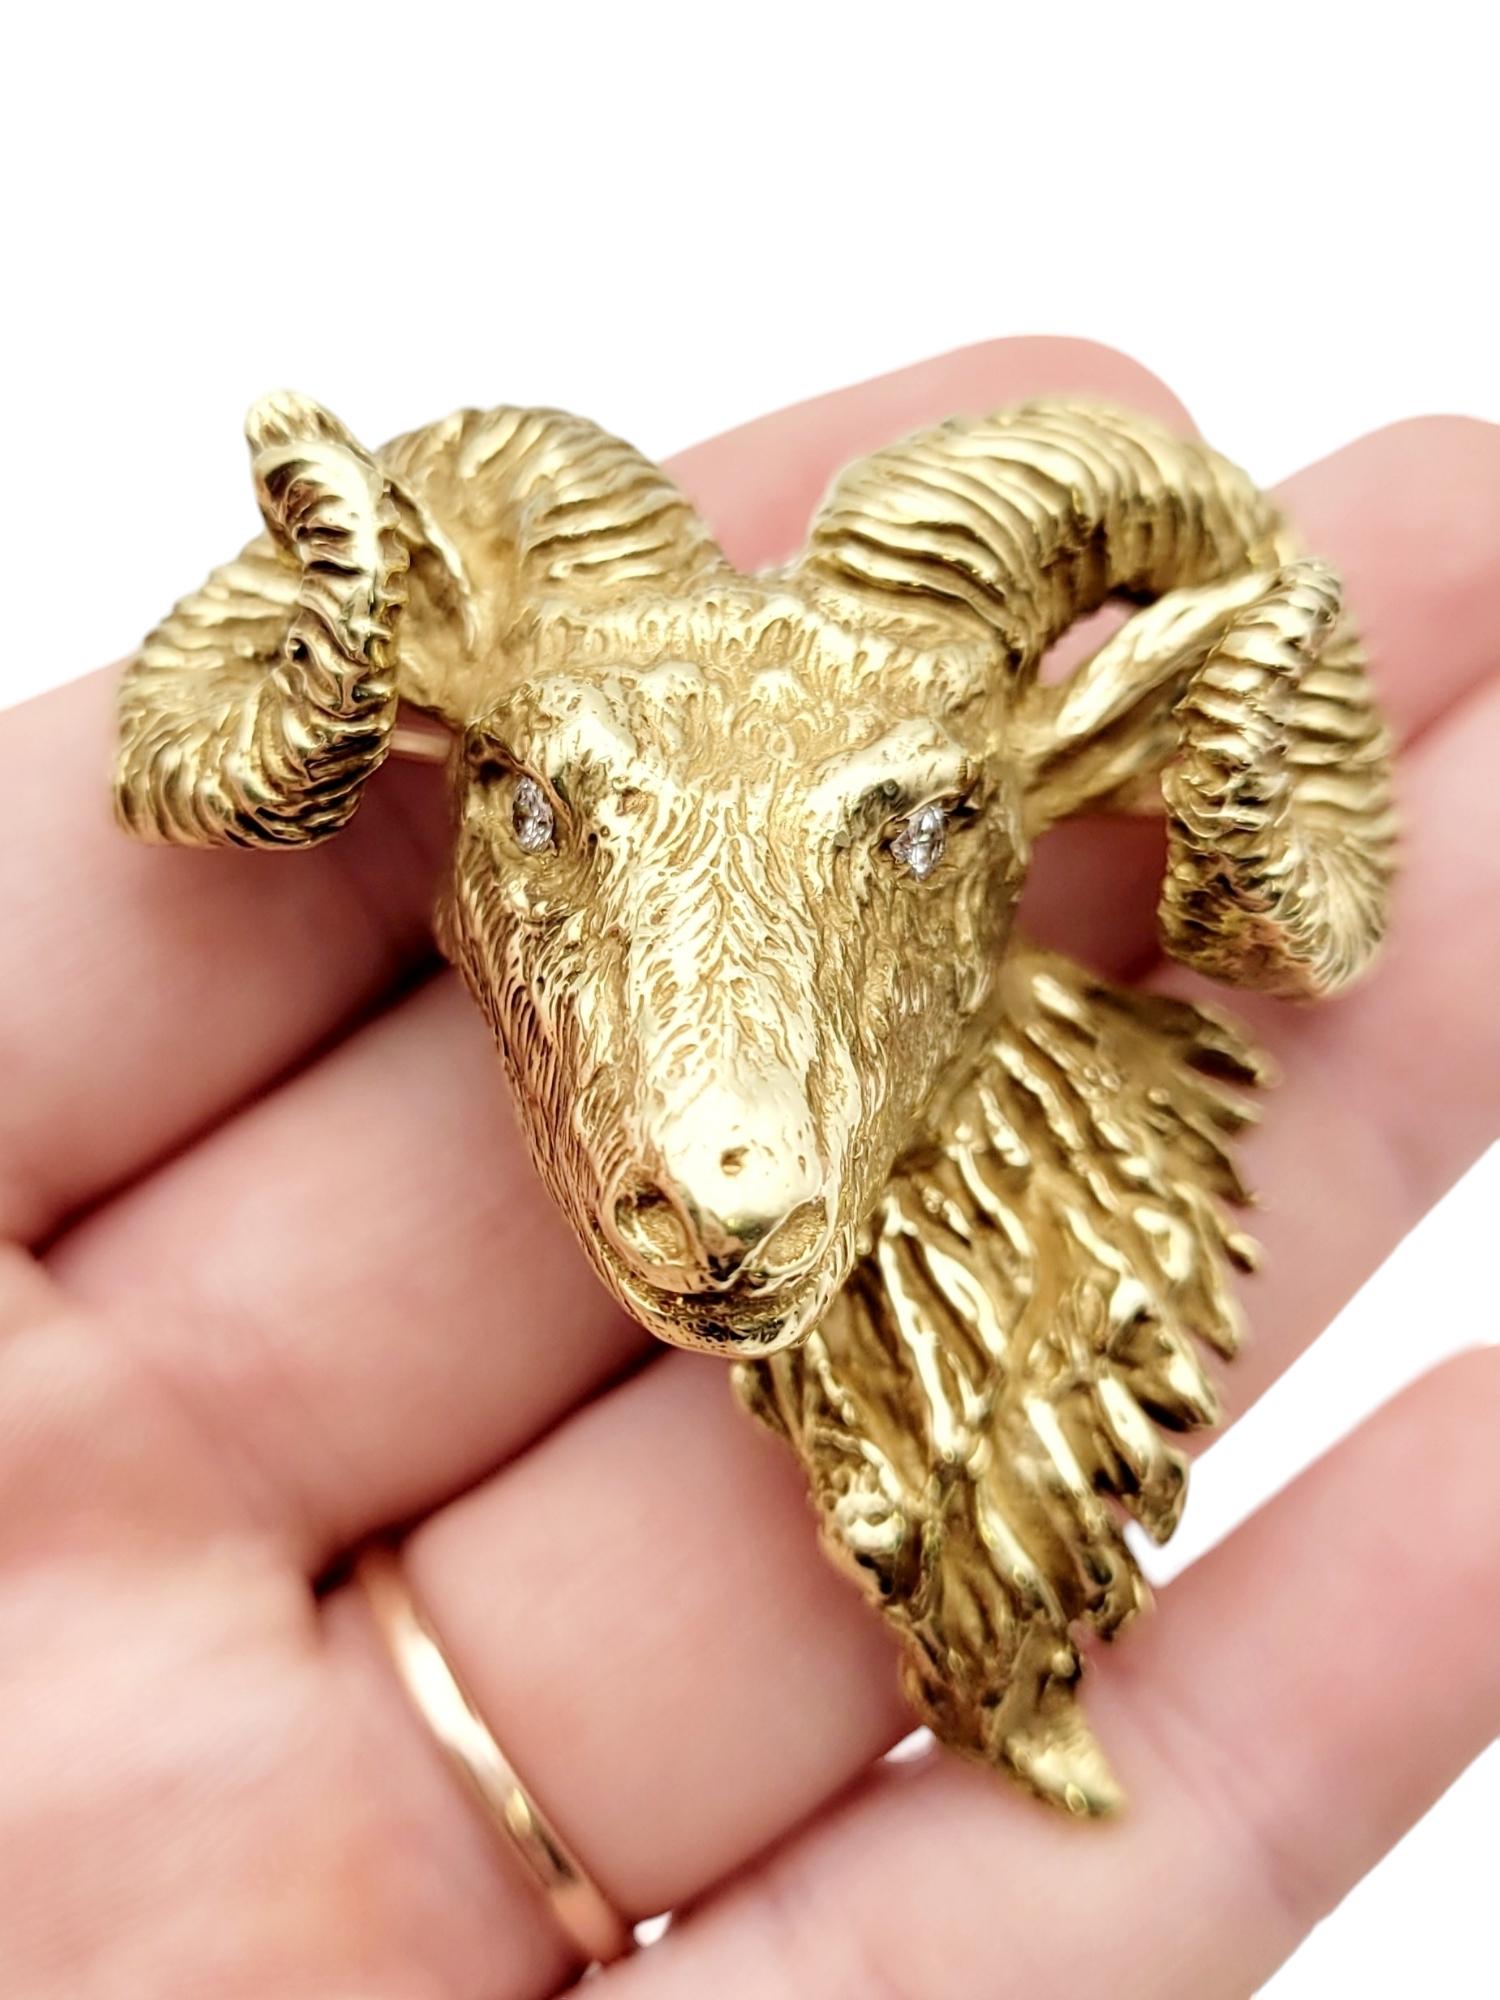 Vintage Erwin Pearl Ram's Head Brooch Pendant with Diamond Eyes in 18 Karat Gold In Good Condition For Sale In Scottsdale, AZ